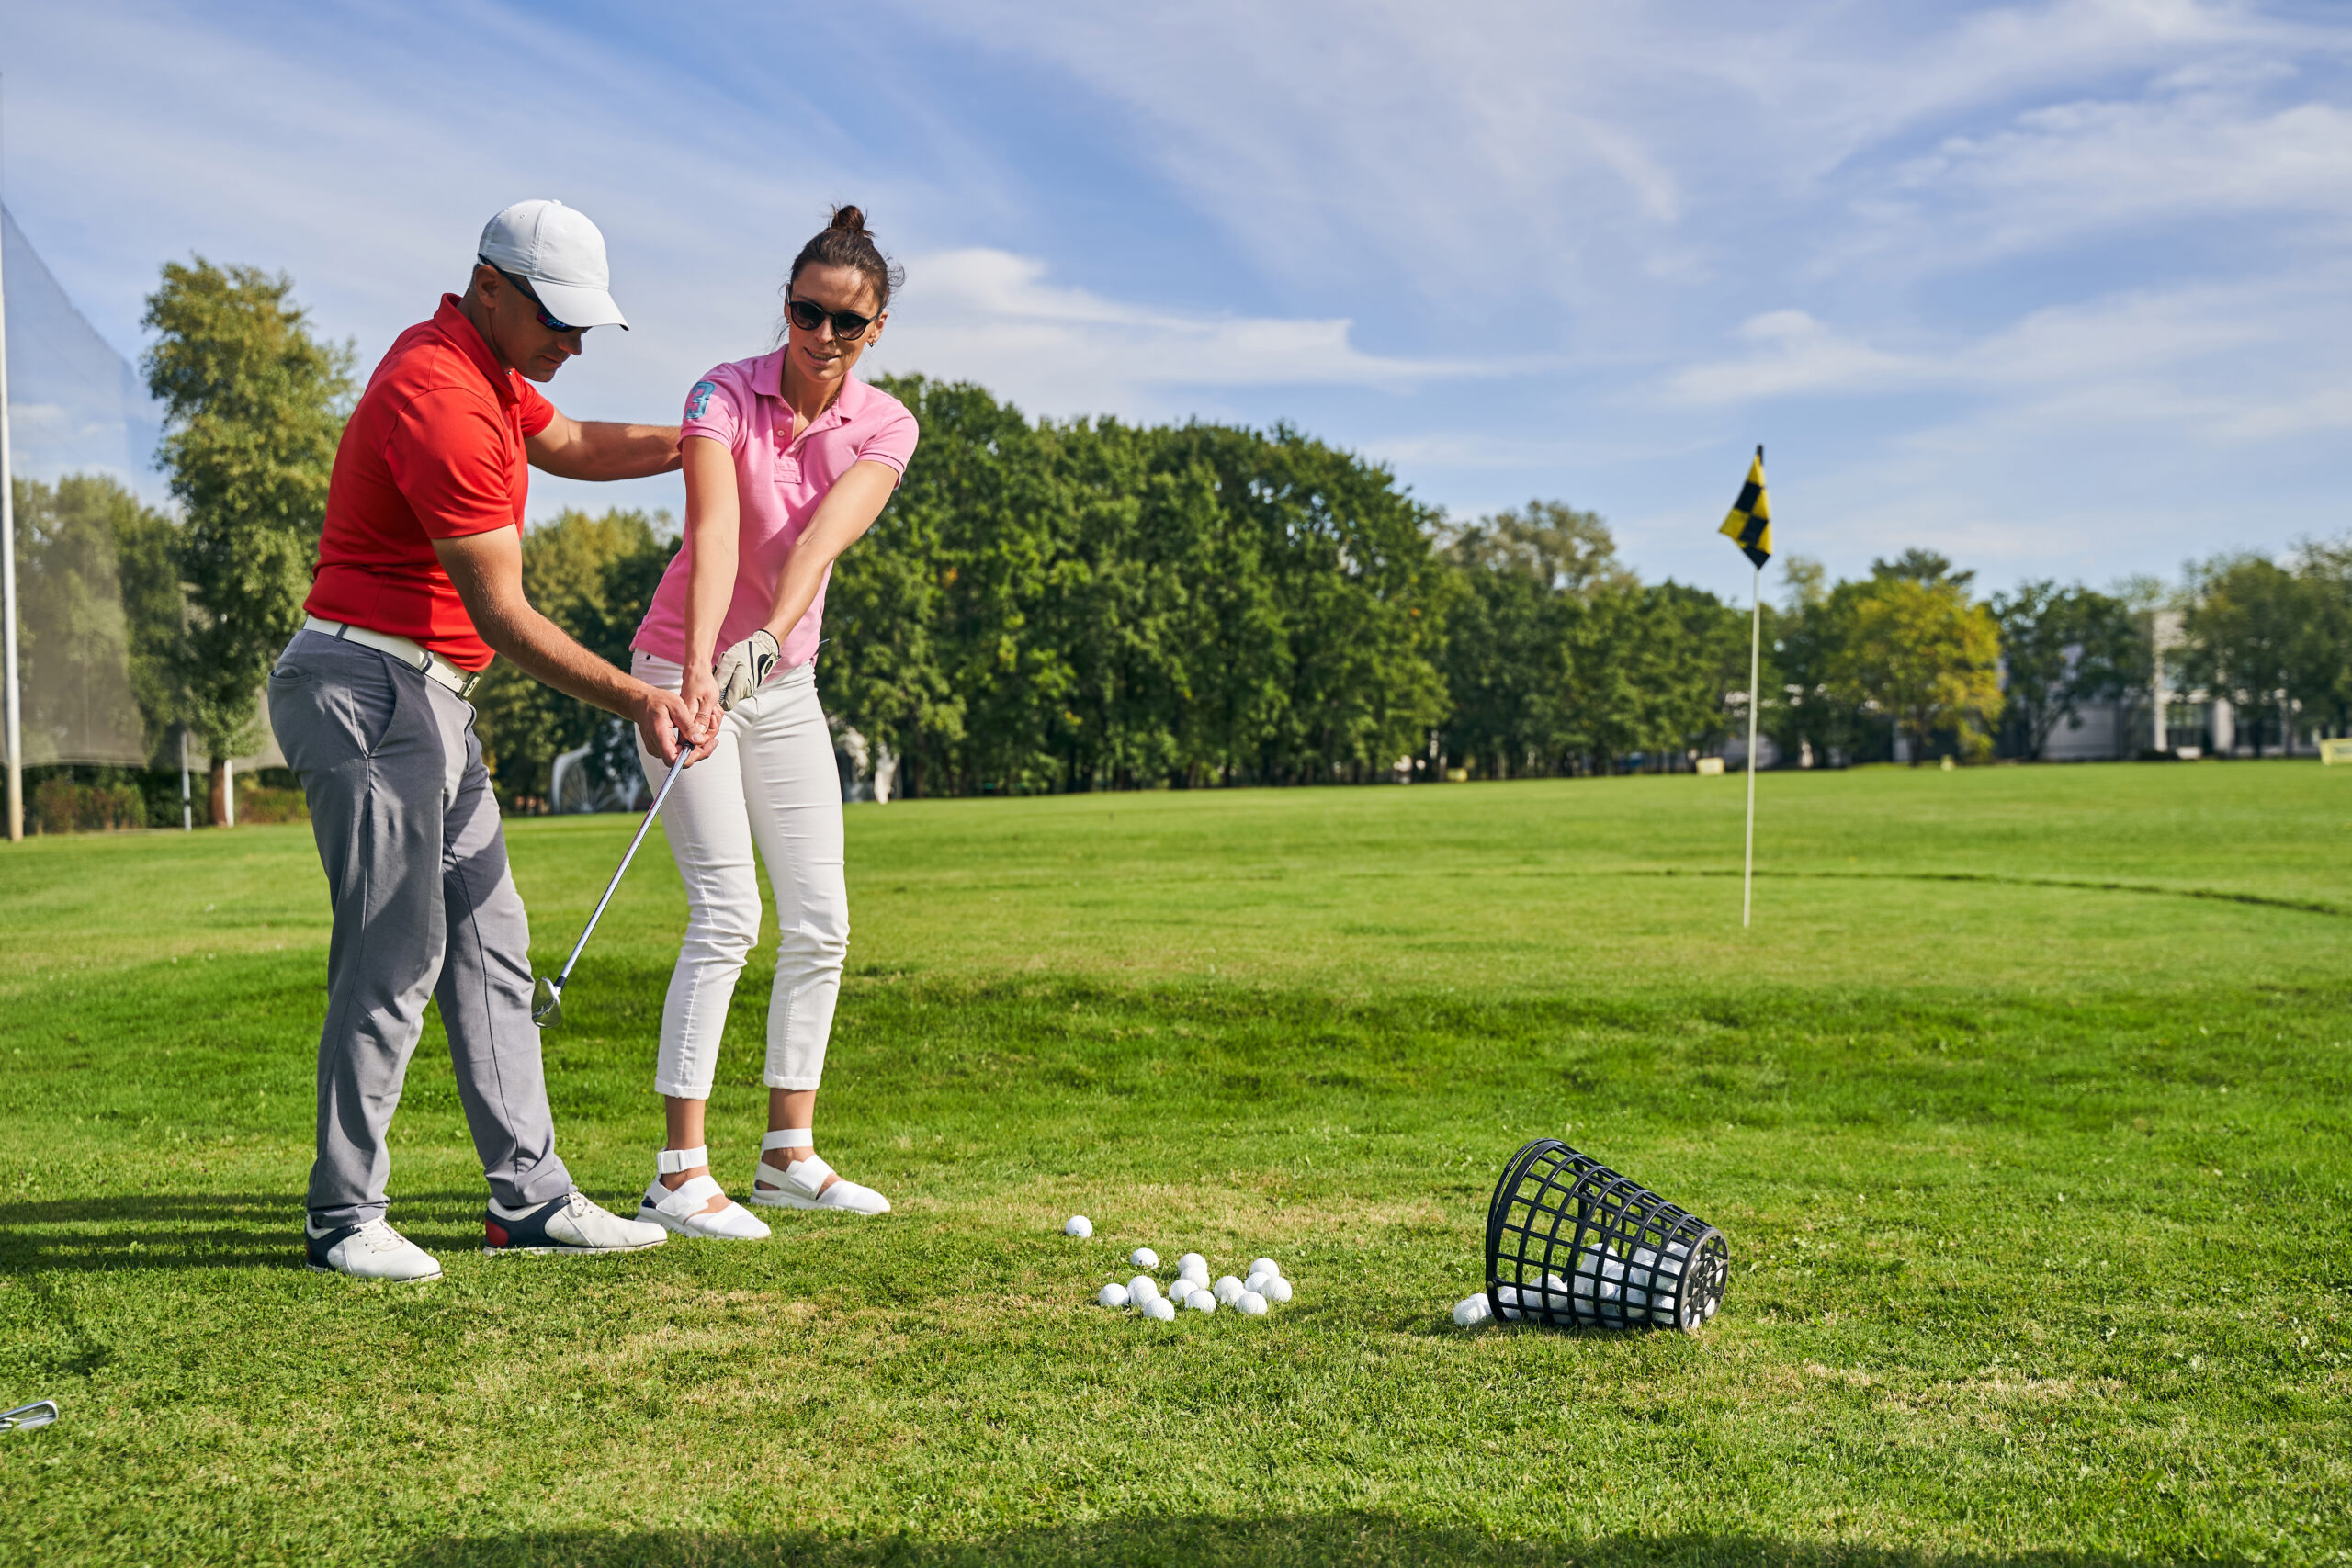 Young female athlete practicing a golf swing on the course helped by a skilled instructor